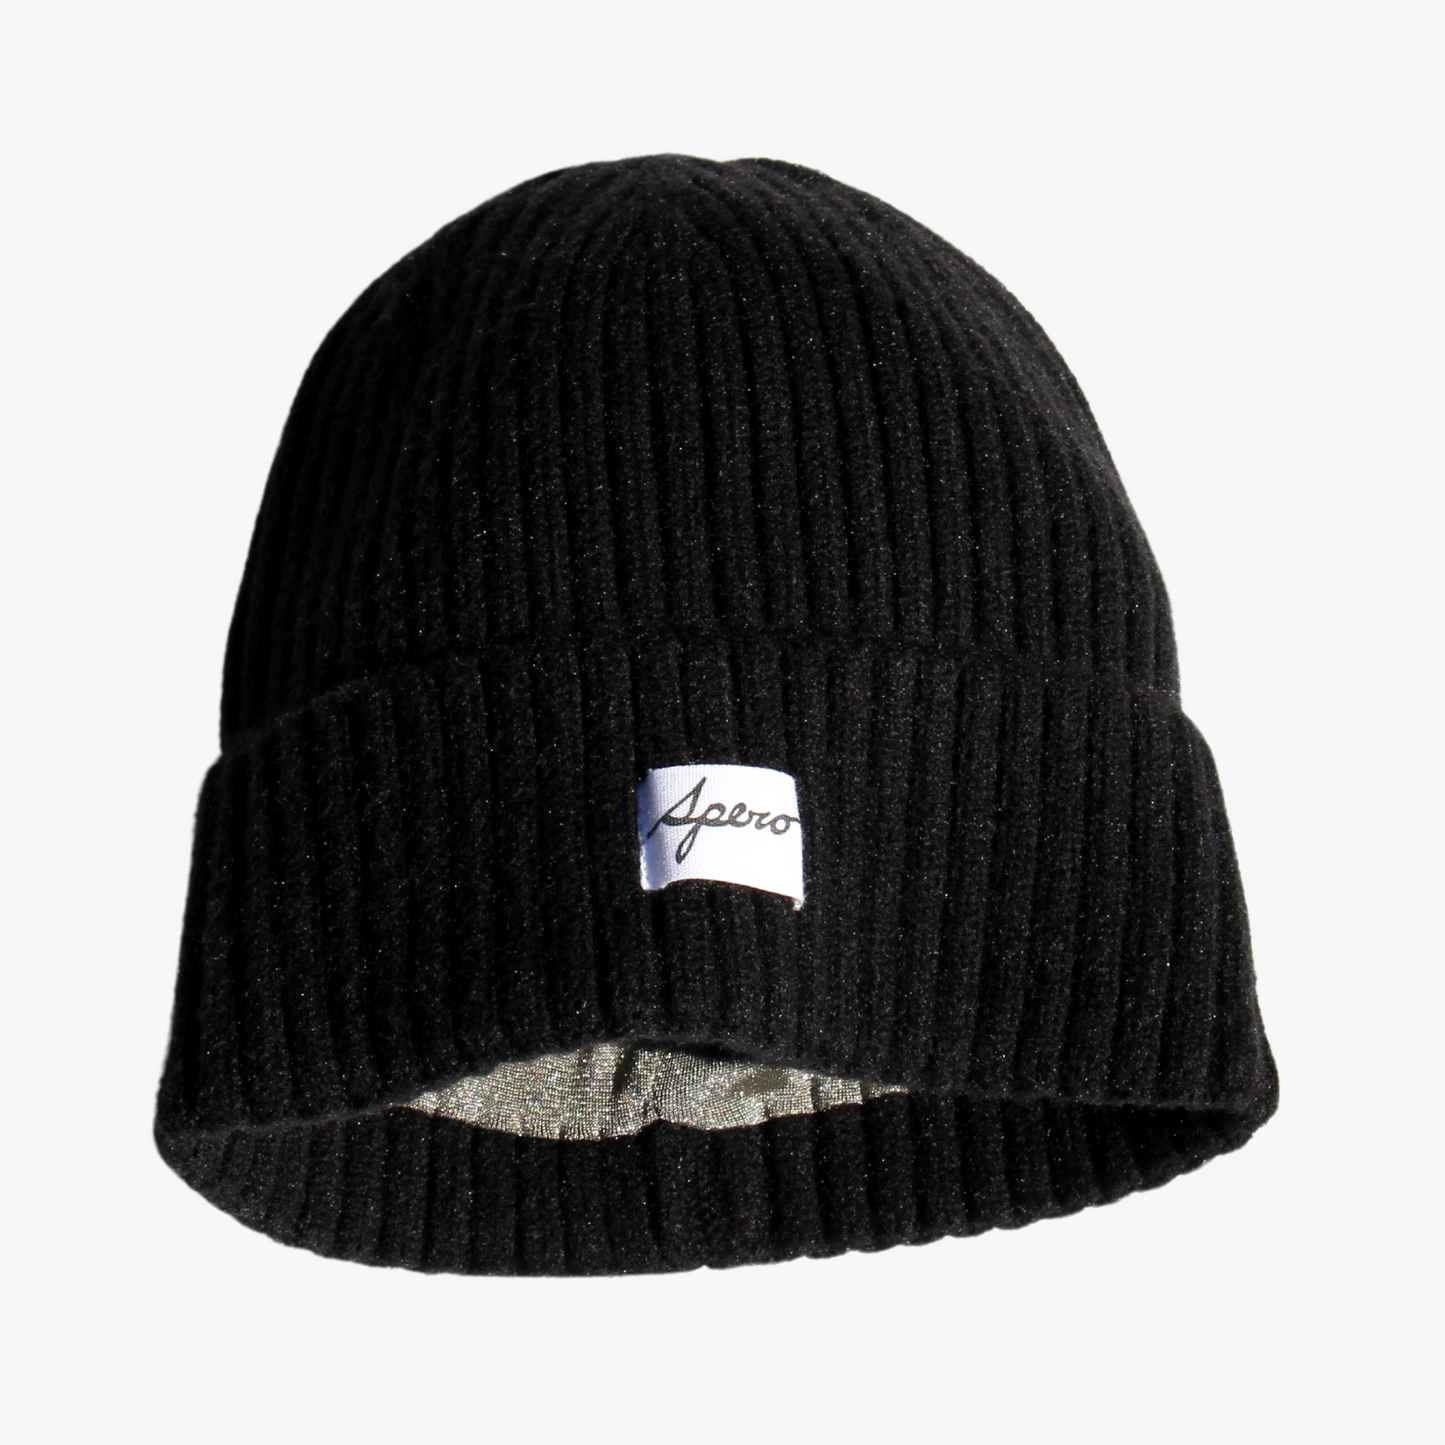 EMF Protective Knit Beanie